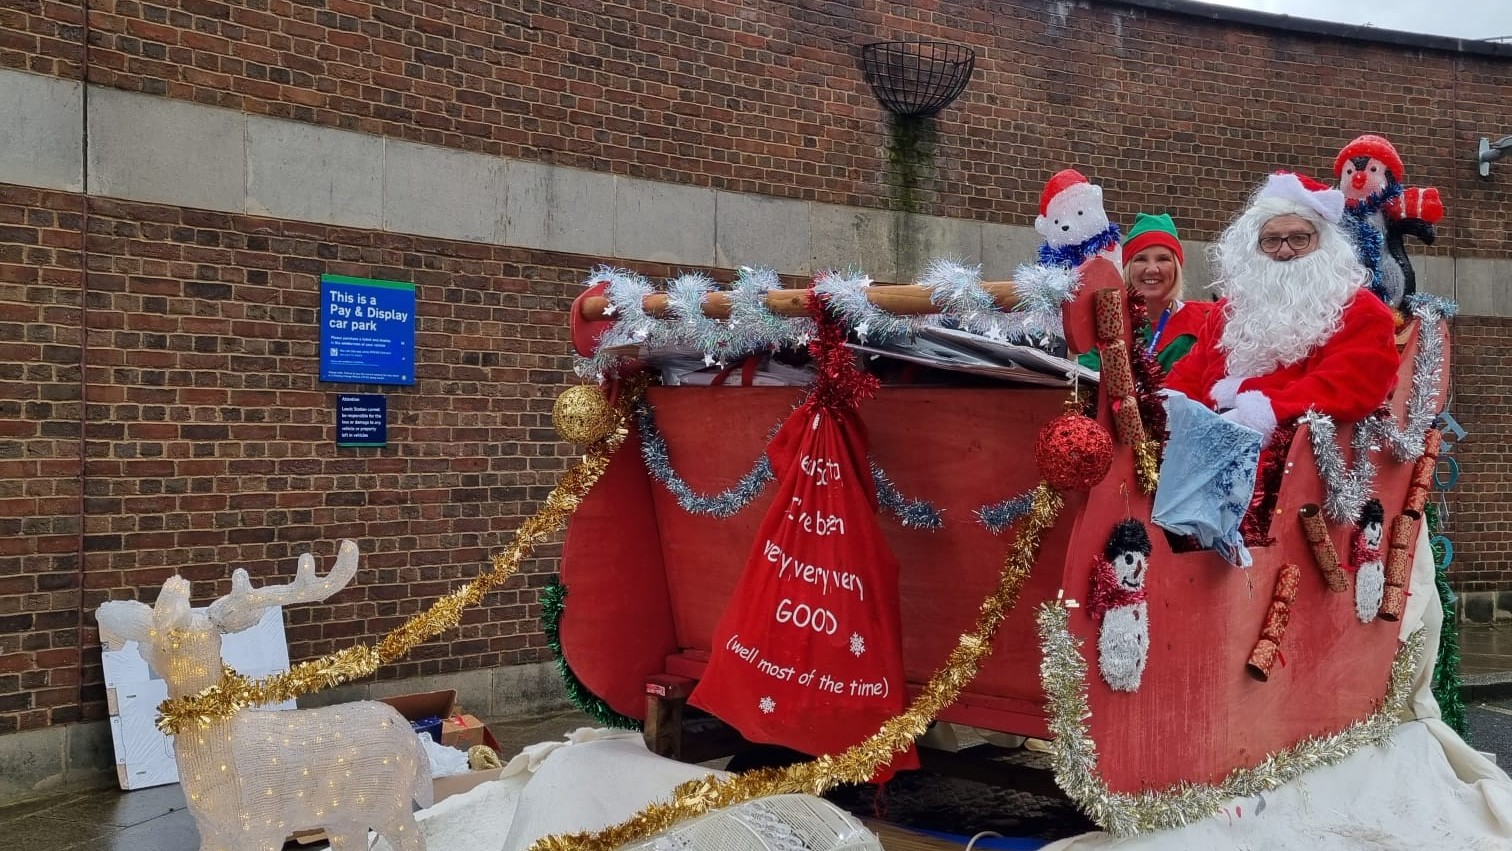 Santa and his elf in a sleigh made by Northern colleagues